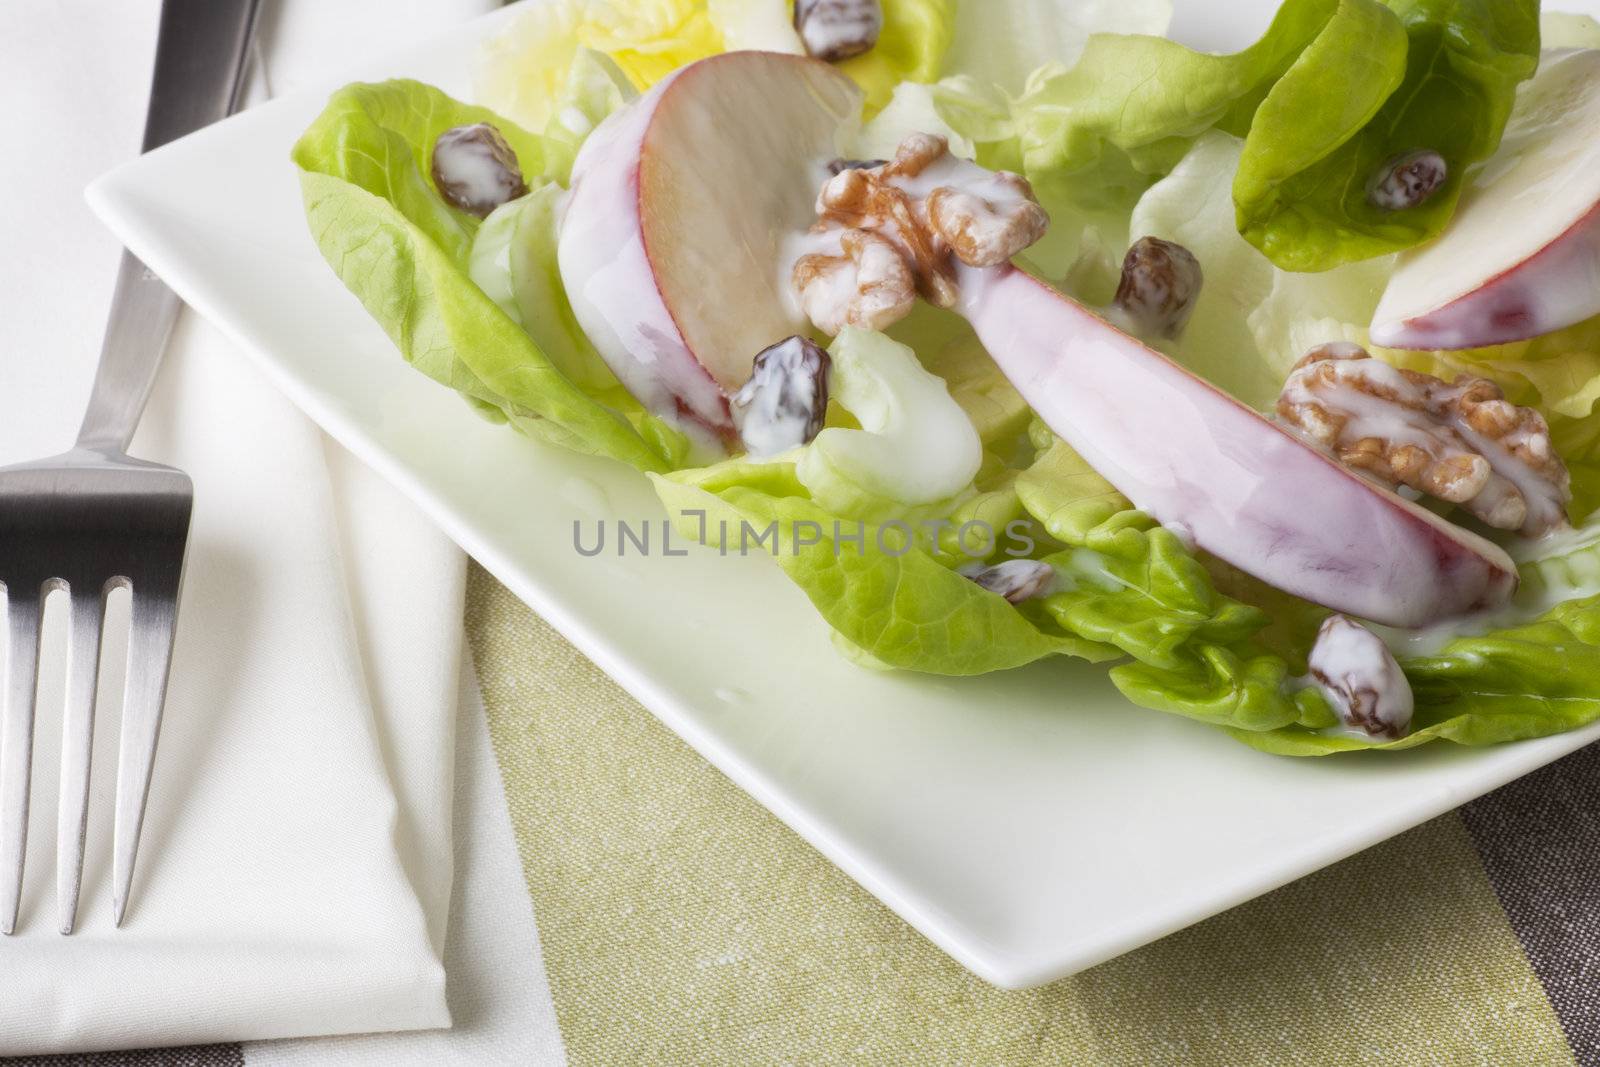 Waldorf salad with sweet red apple slices, walnuts and raisins, covered in yogurt.